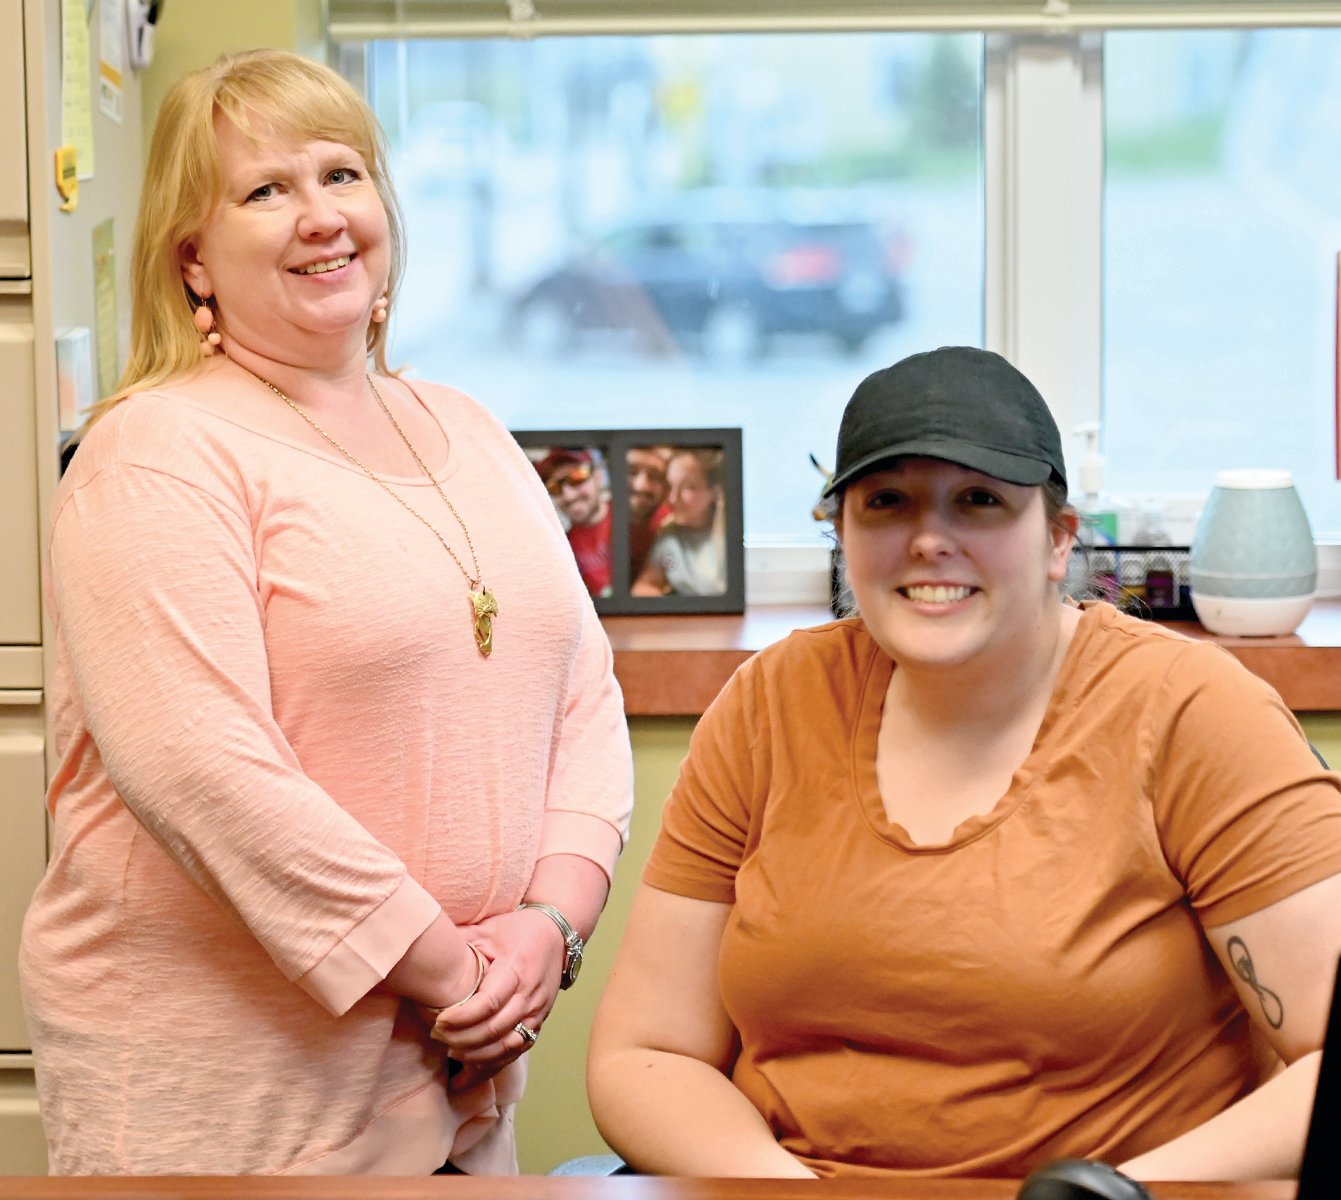 MU Extension Administrative Assistant/Bookkeeper Becky Layton, left, and Youth Program Associate Dakota Souders are excited to have joined the agency and look forward to helping residents access the numerous resources and programs available.